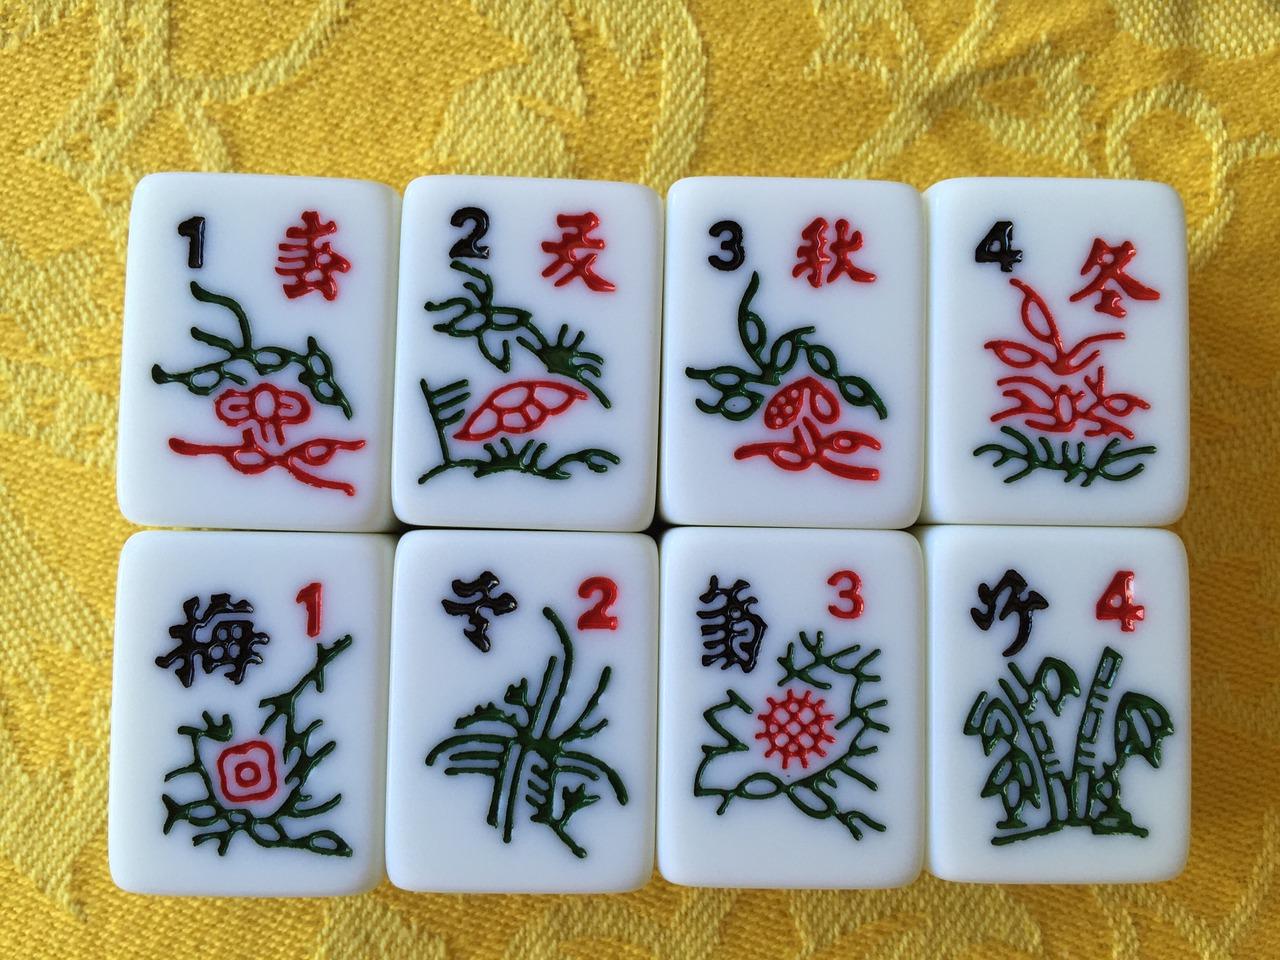 Mahjong Beginners' Course - Adult Event